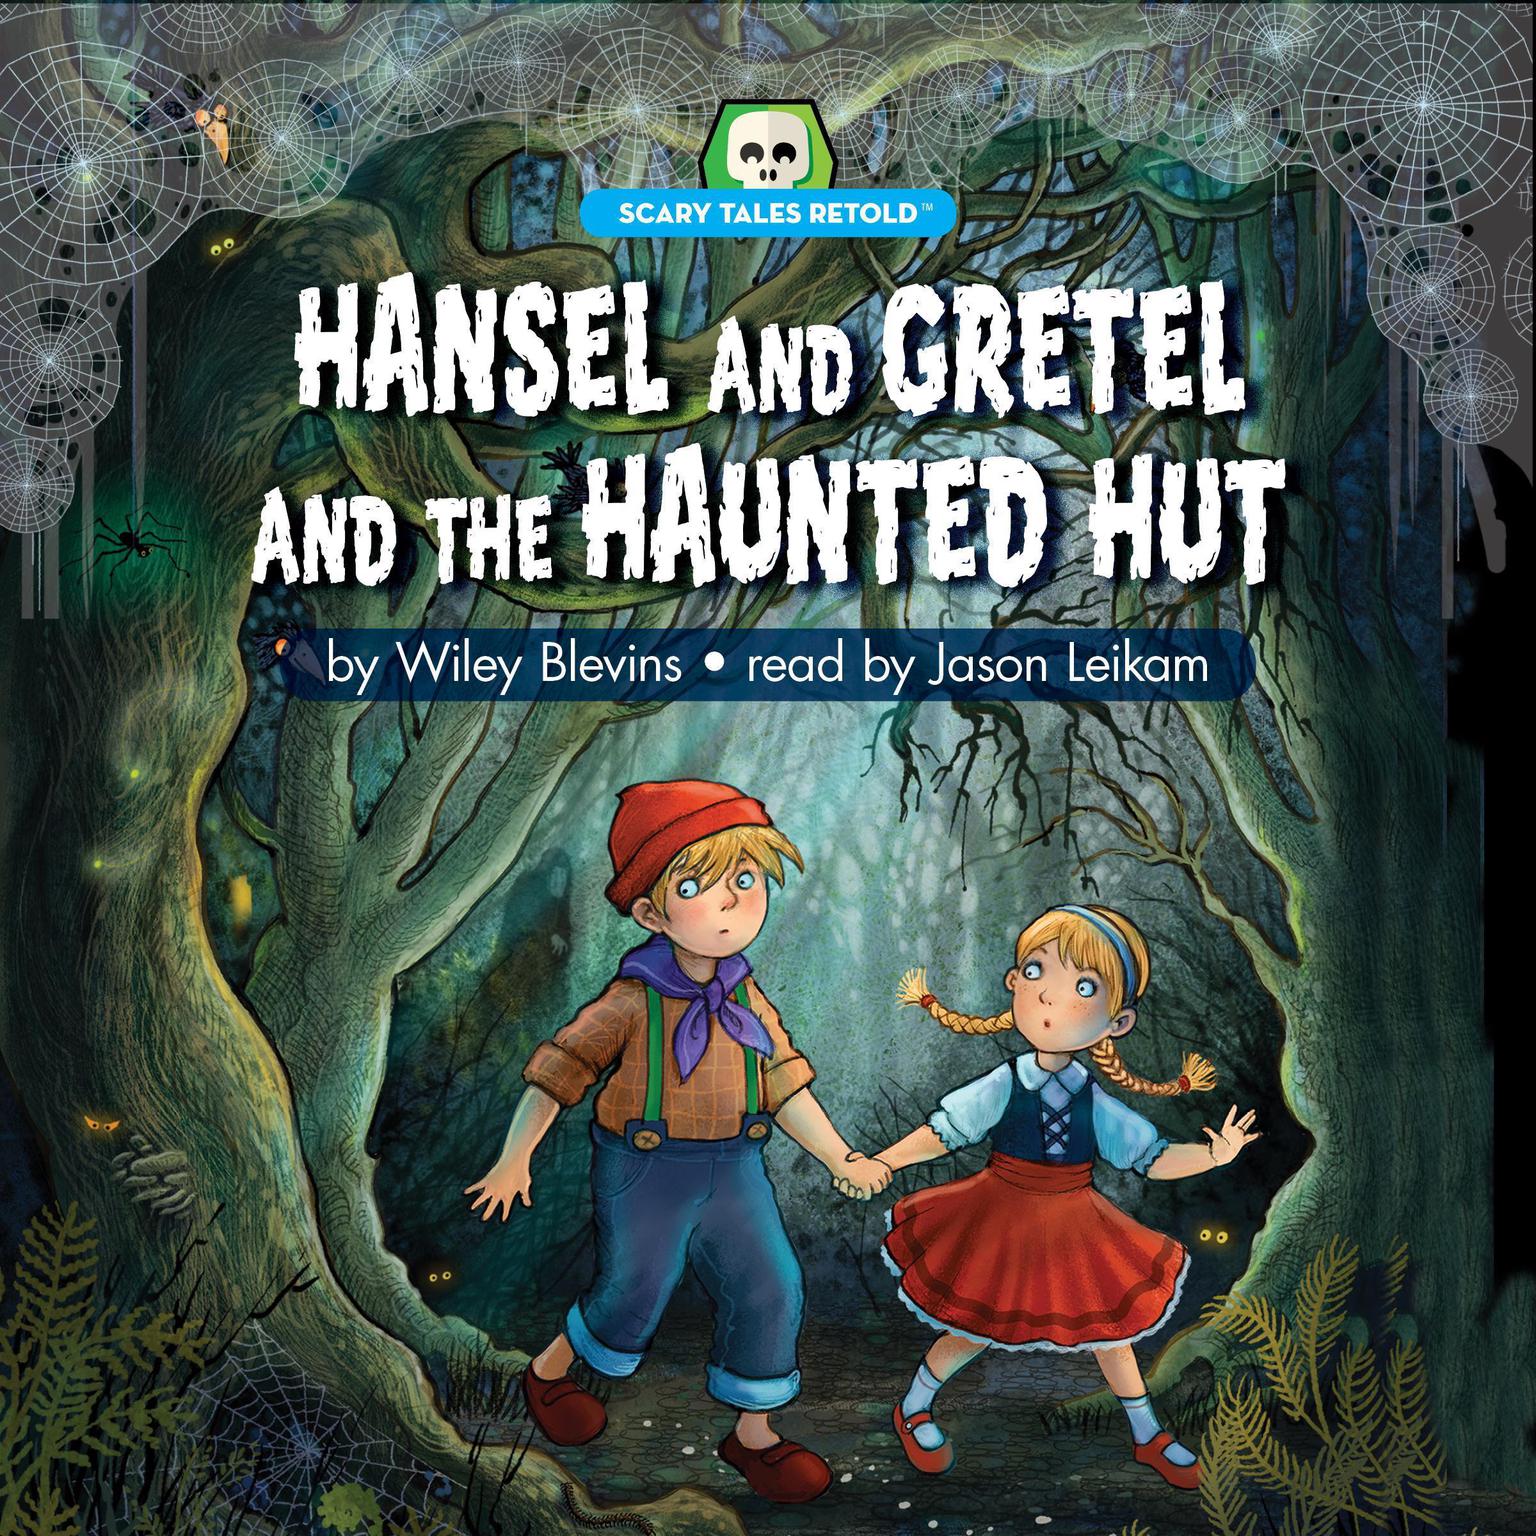 Hansel and Gretel and the Haunted Hut: Scary Tales Retold Audiobook, by Wiley Blevins